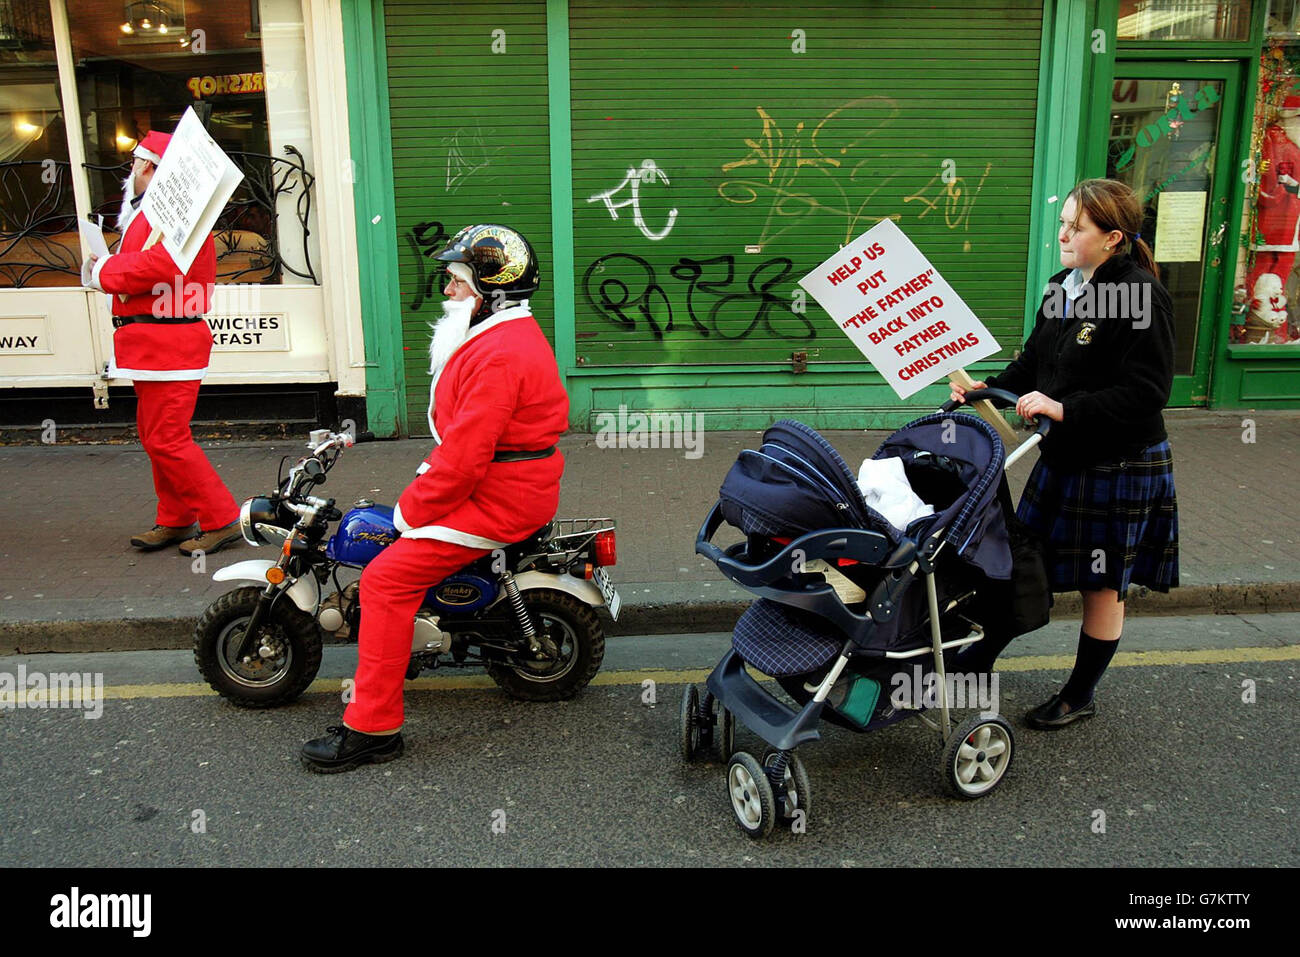 Unmarried and Separated Fathers of Ireland protesting. They were protesting against what they describe as an unjust and unequal family law system. Stock Photo